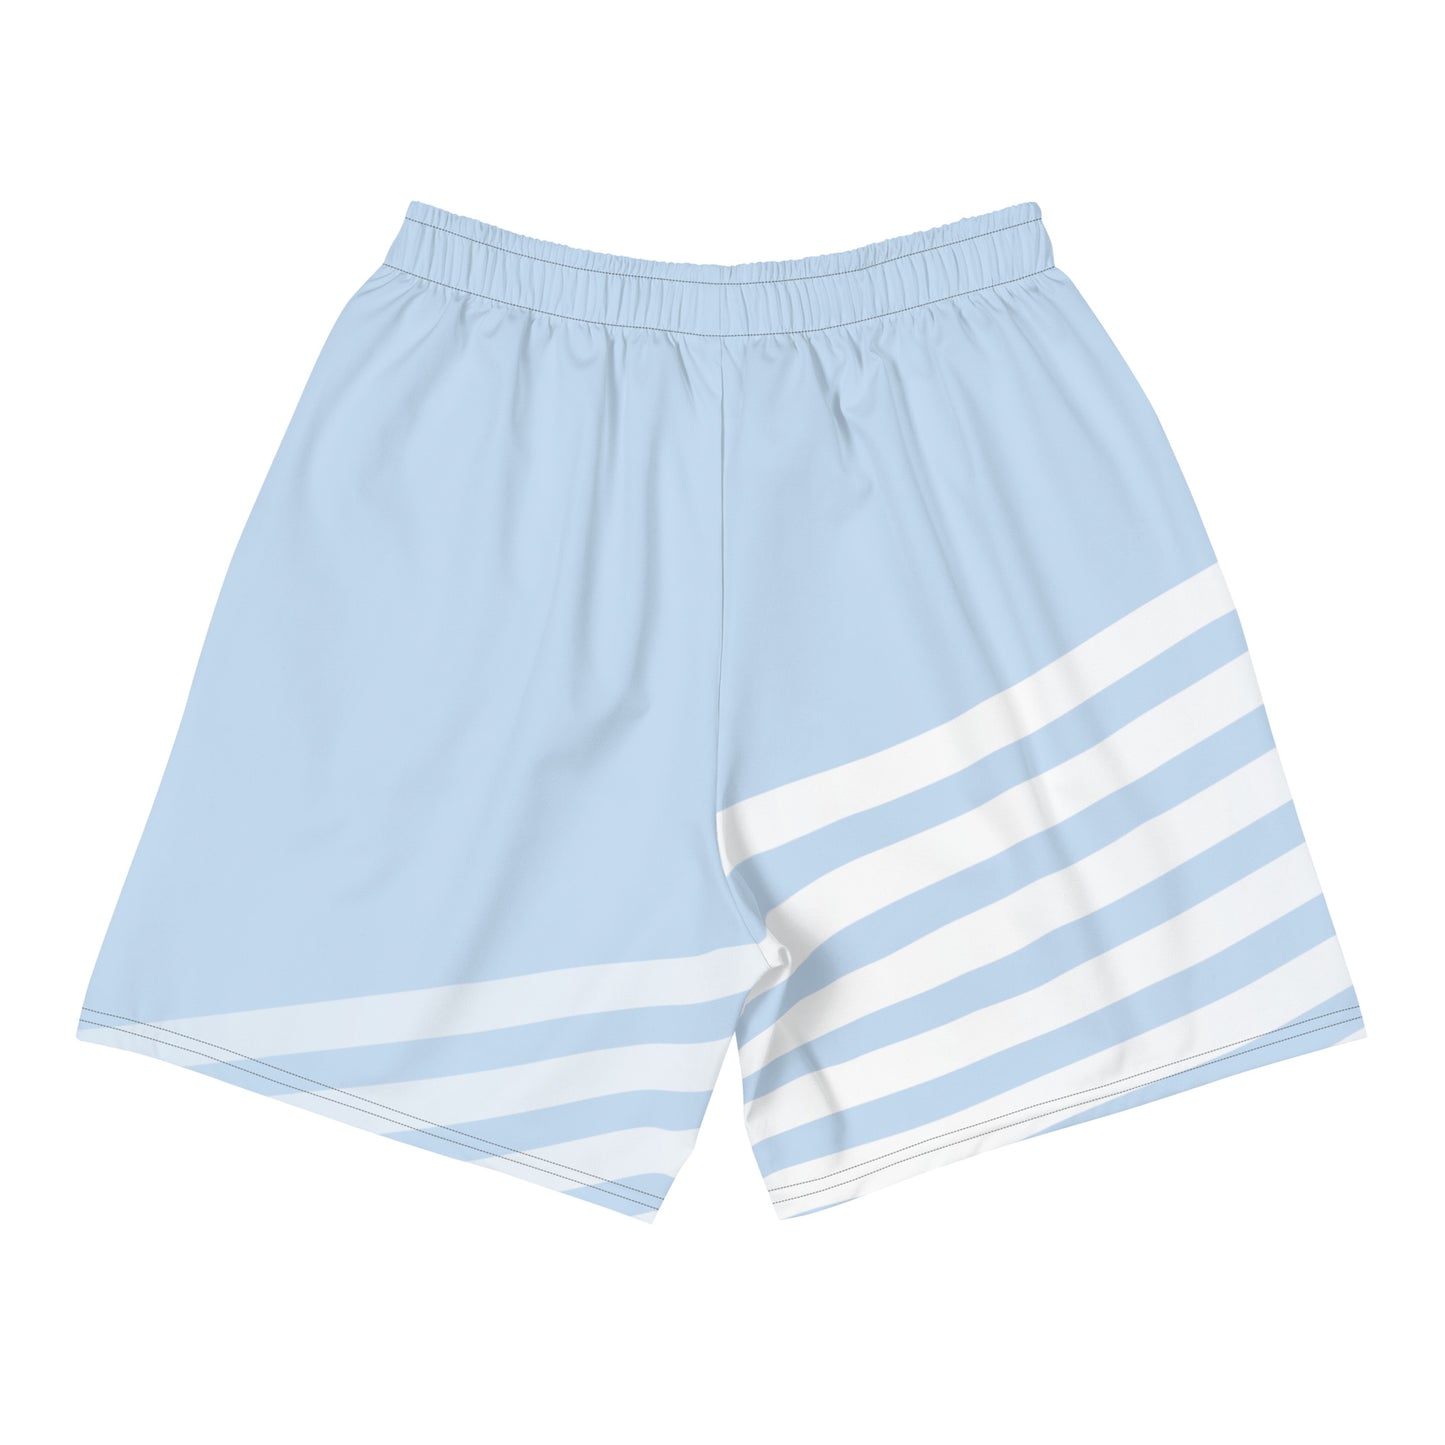 Mens LuxeStride Sky Blue Shorts